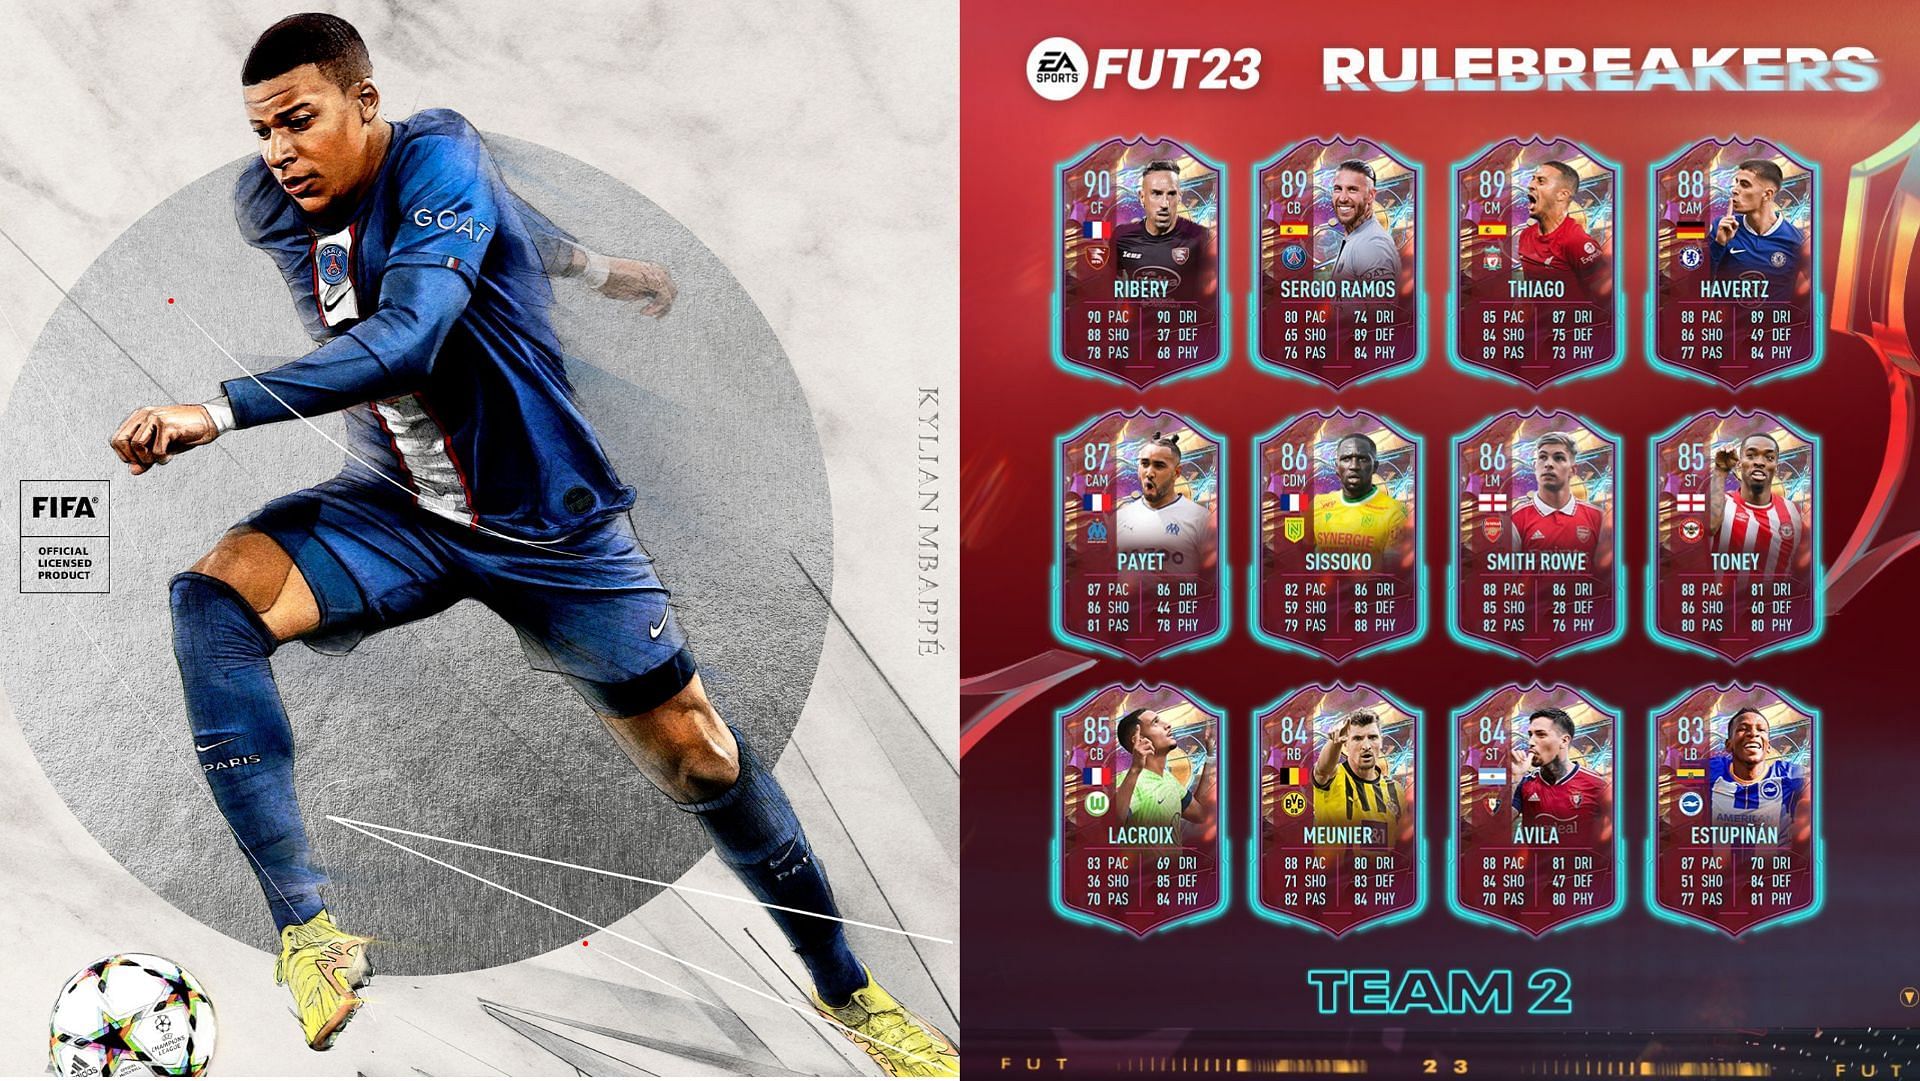 The second team of the promo has been released (Images via EA Sports)